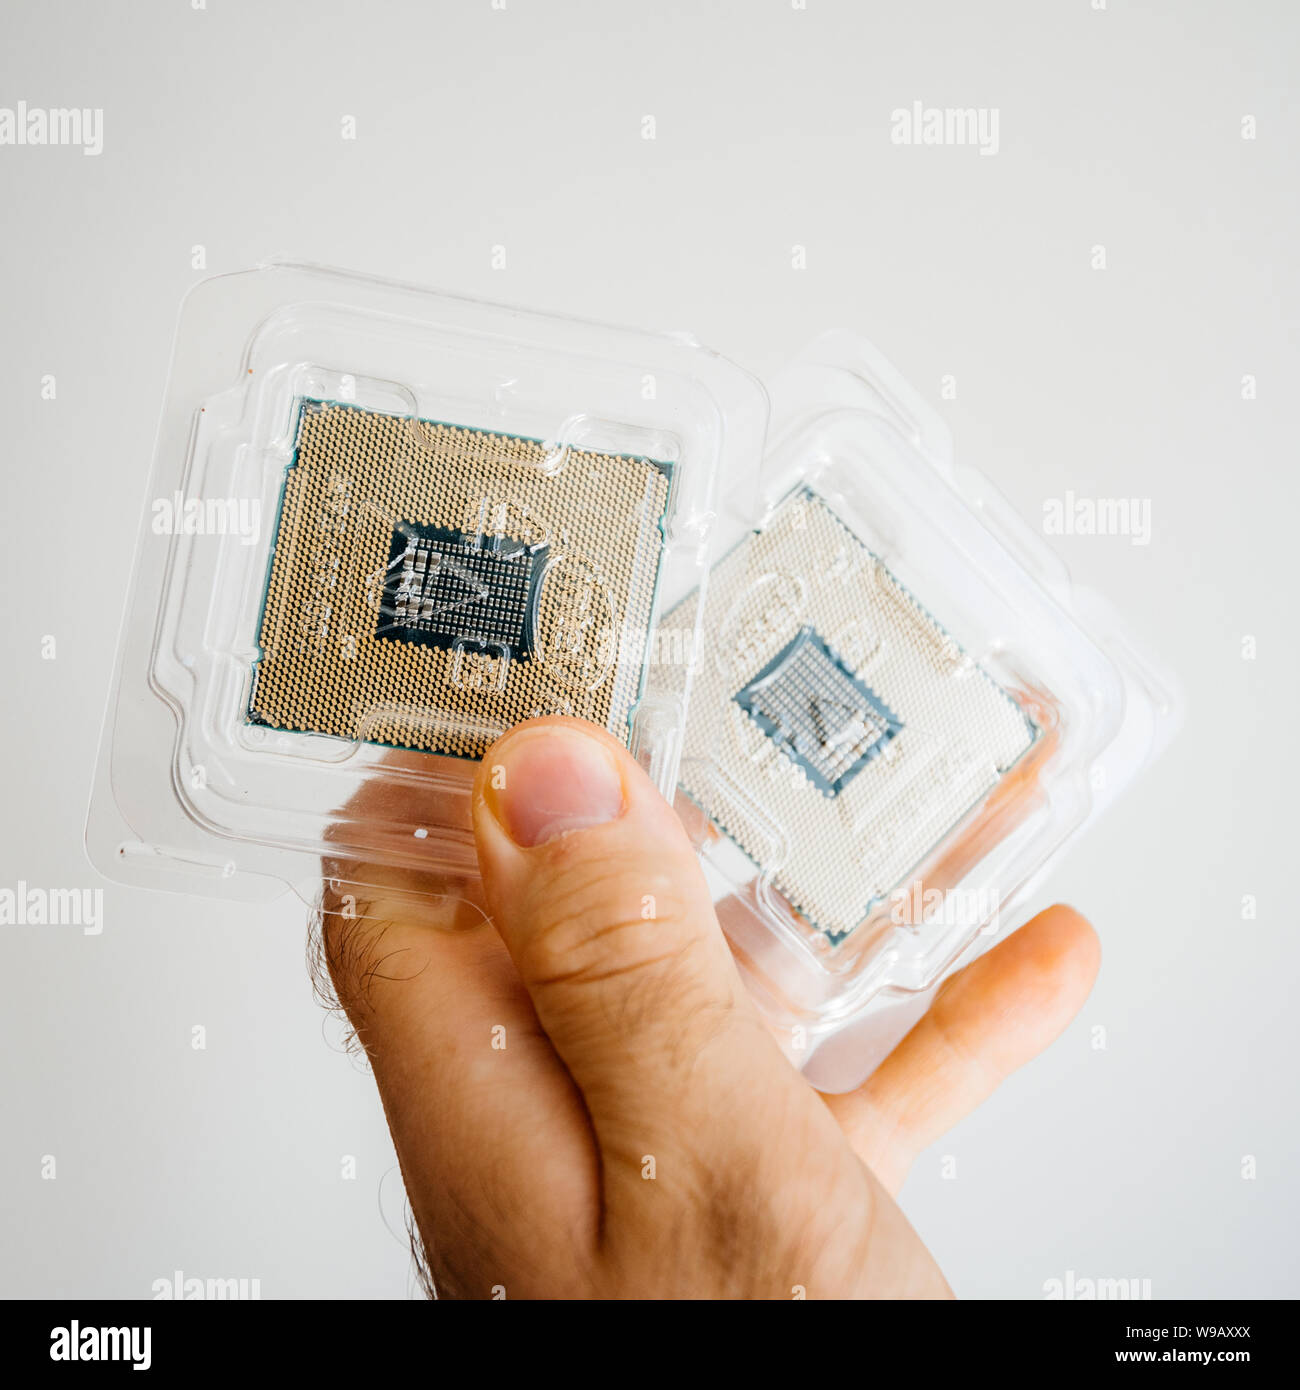 Paris, France - May 31, 2019: Close-up of engineer male hand holding two  new professional Intel Xeon E5-2687w v4 CPU processor in plastic blister  unboxing white background Stock Photo - Alamy